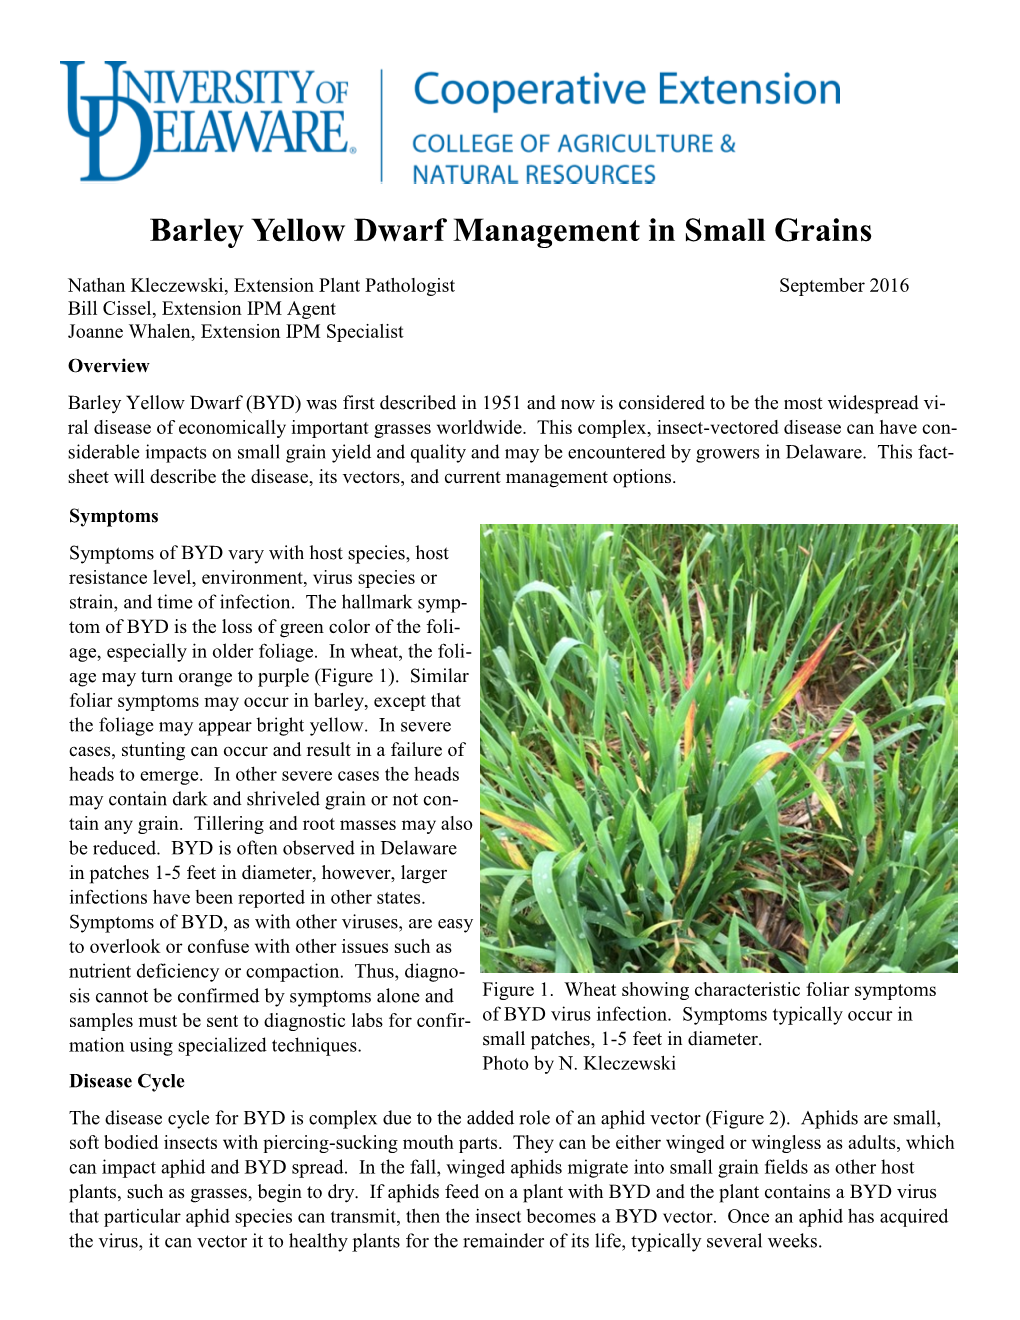 Barley Yellow Dwarf Management in Small Grains